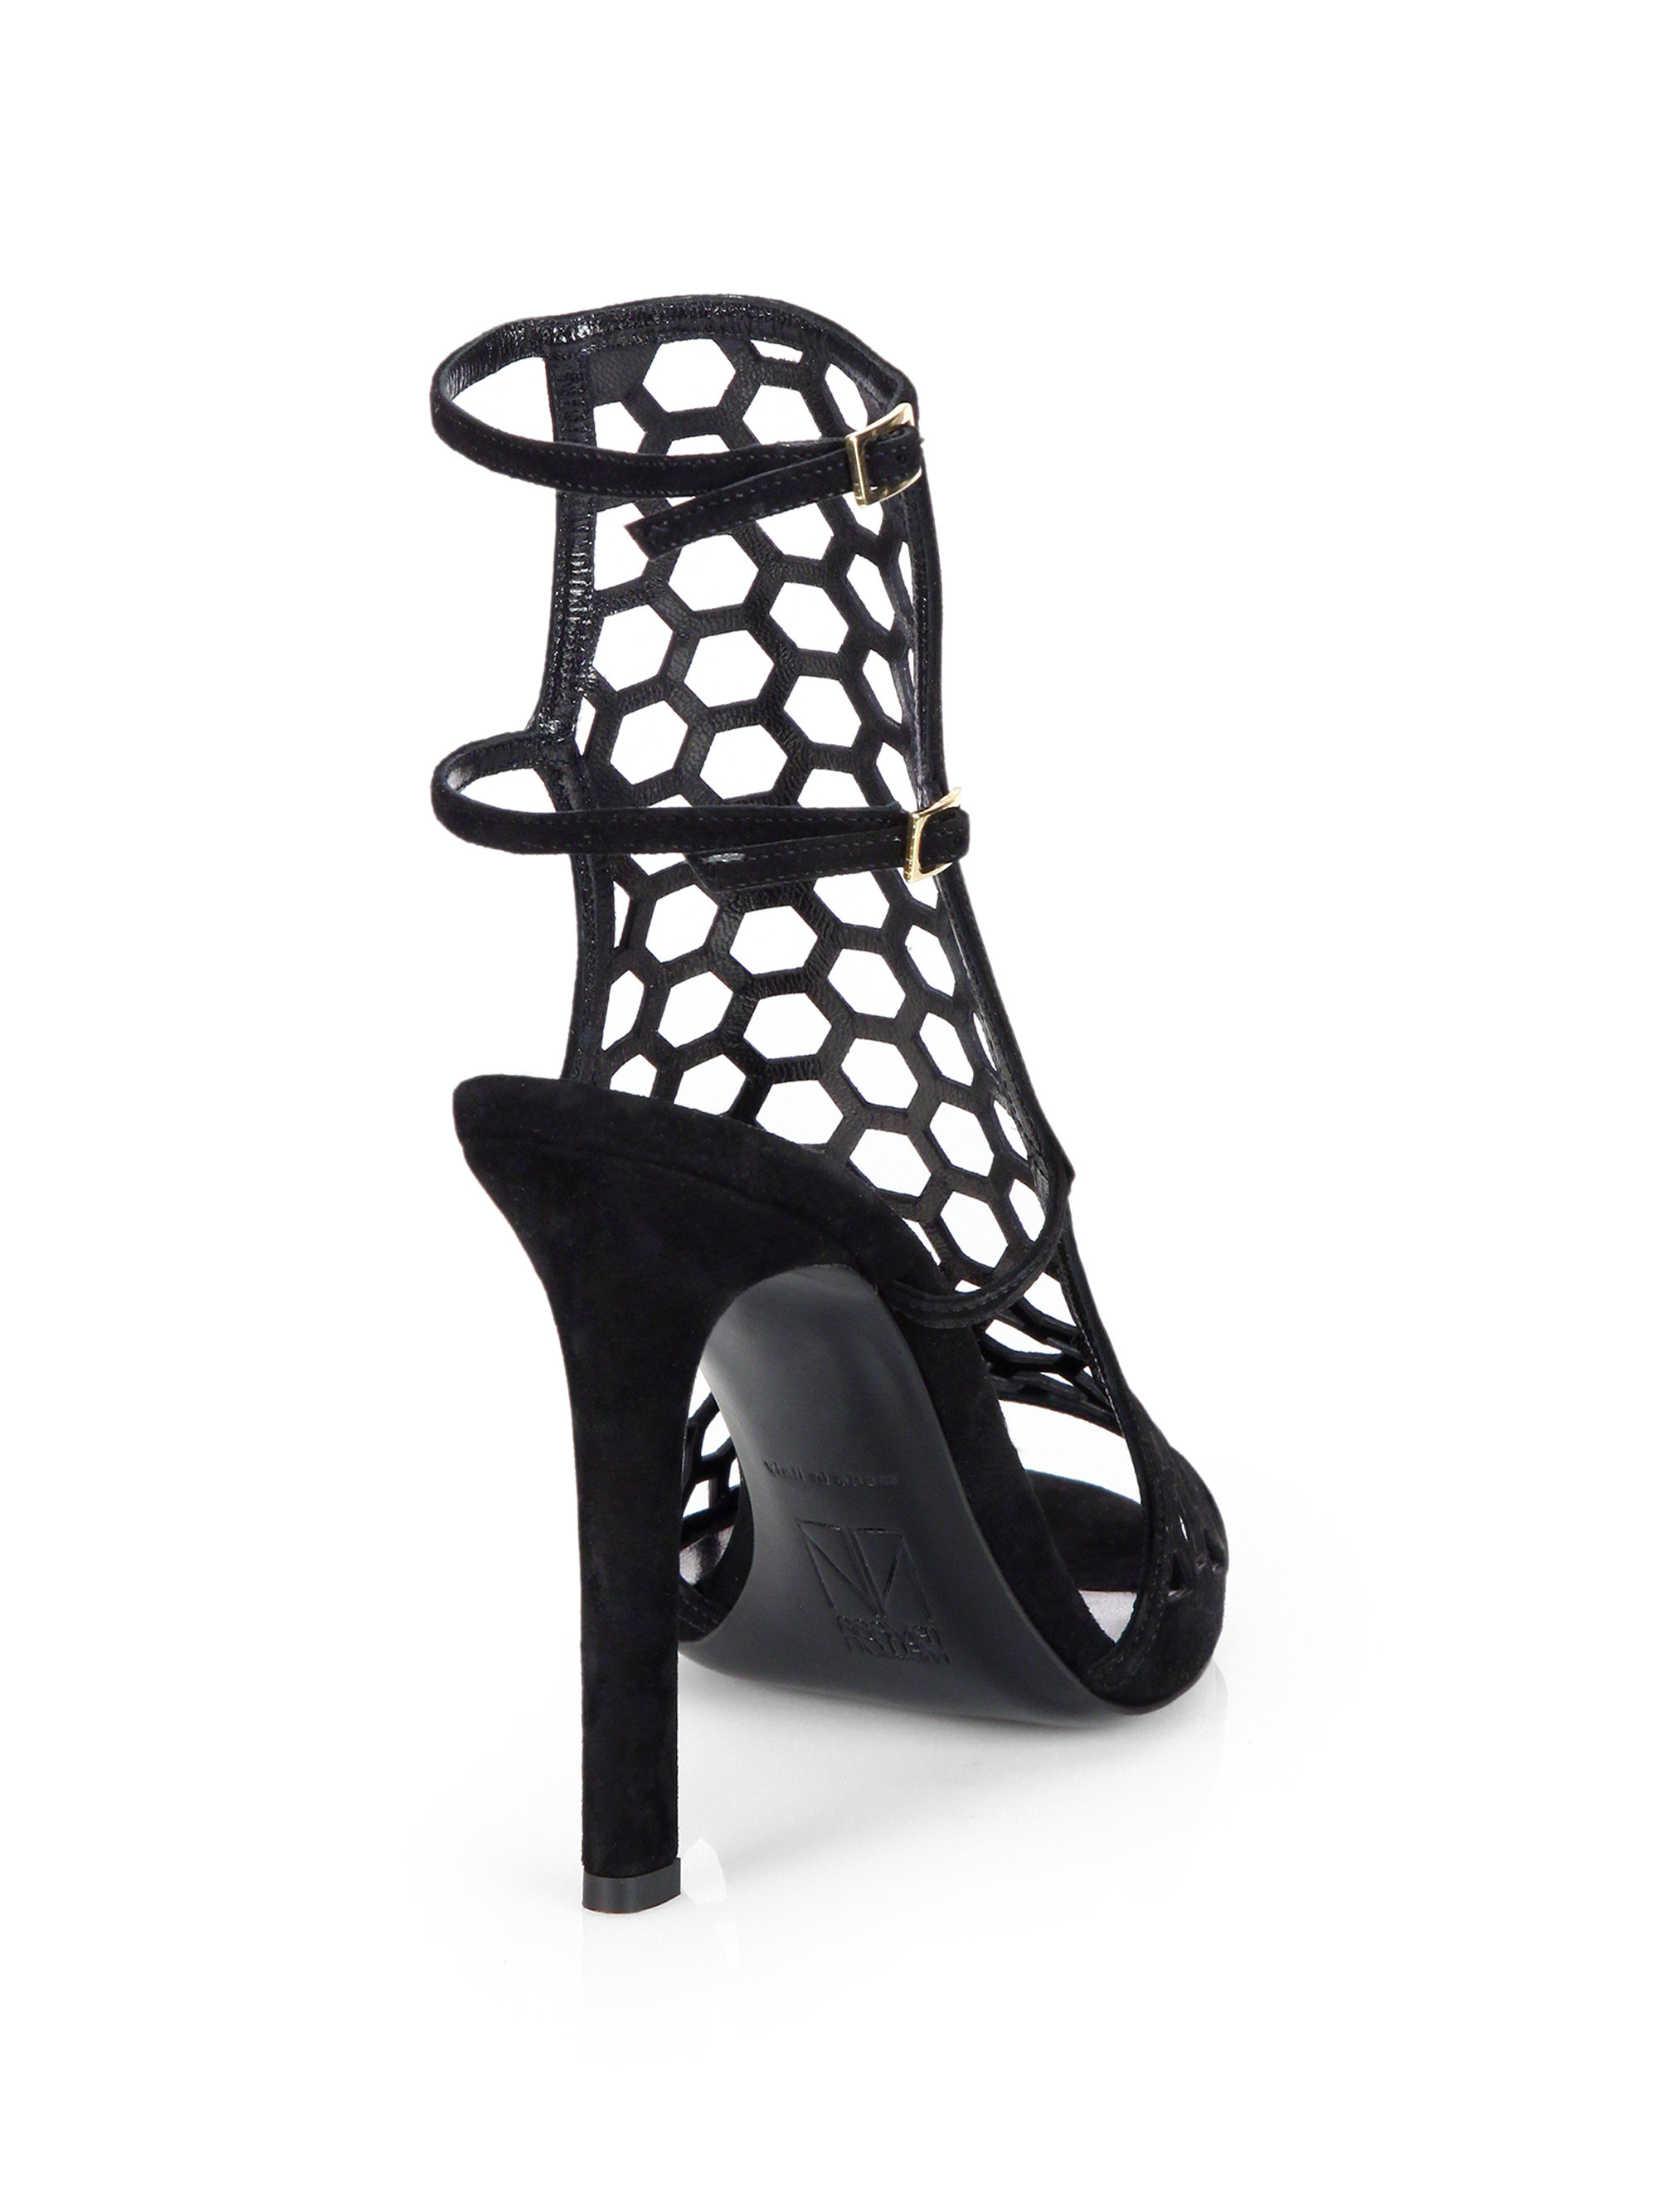 Lyst - Tamara Mellon Scandal Honeycomb Suede & Patent Leather Sandals ...